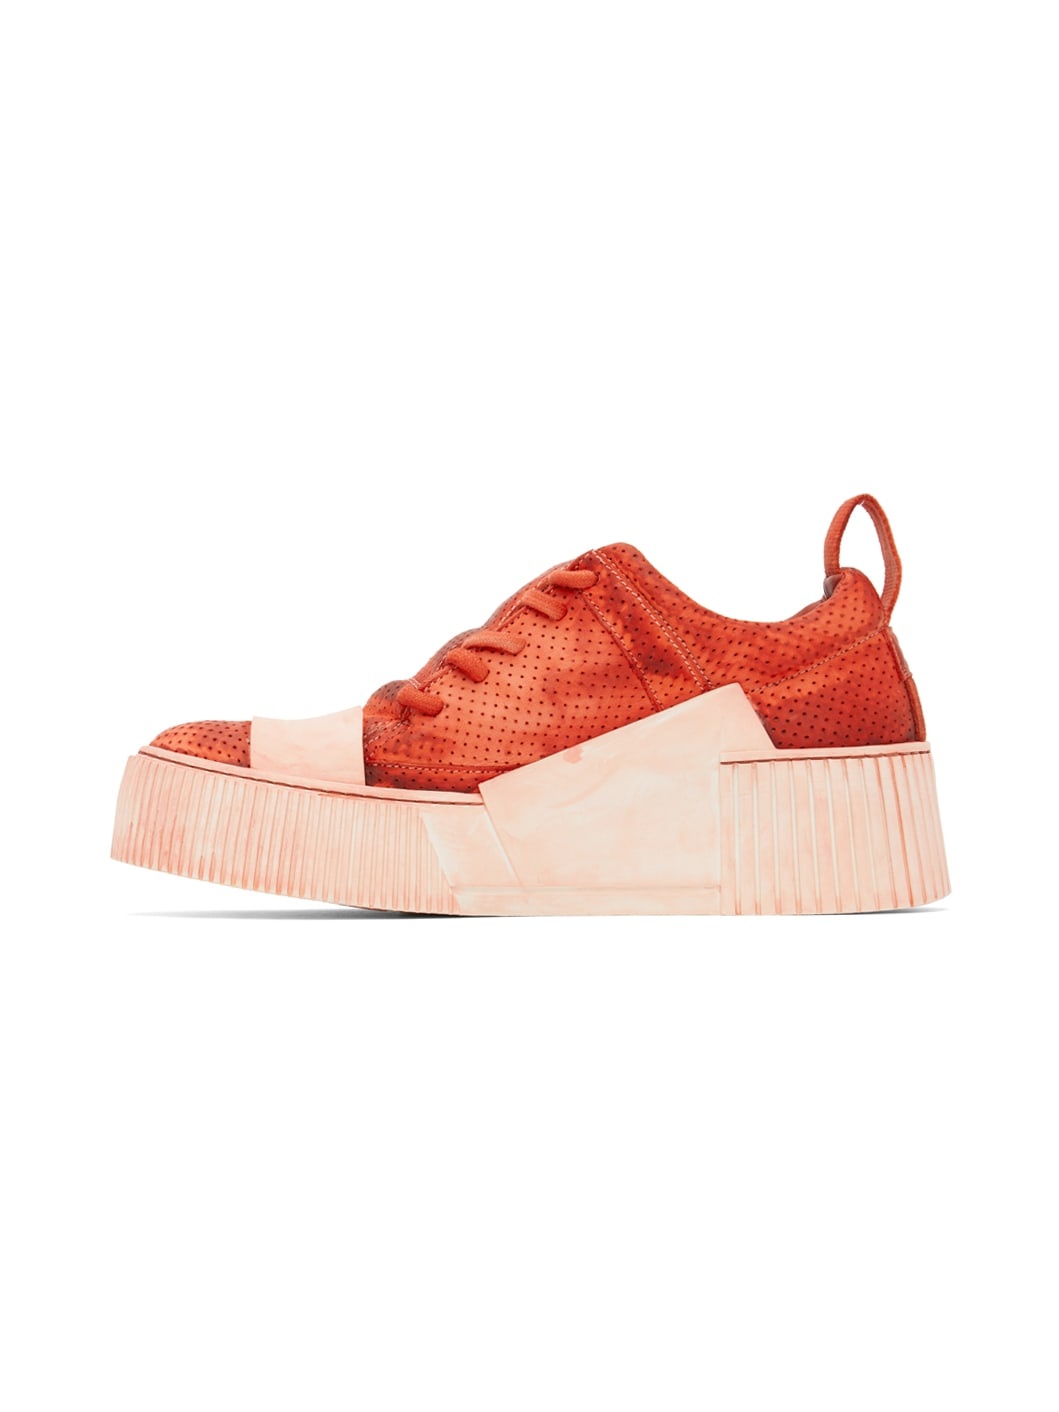 SSENSE Exclusive Red Bamba 2.1 Sneakers - 3